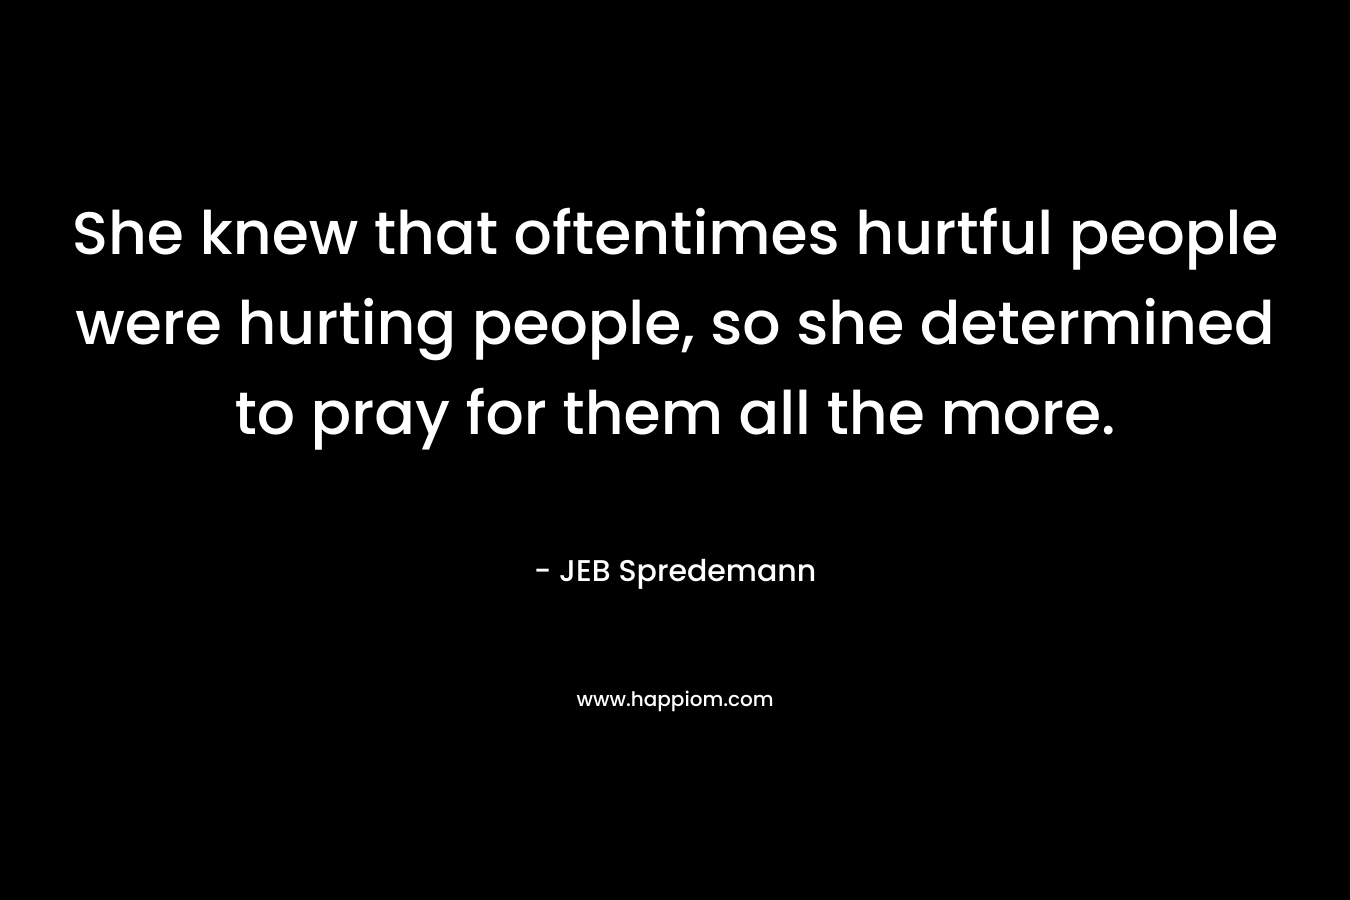 She knew that oftentimes hurtful people were hurting people, so she determined to pray for them all the more. – JEB Spredemann